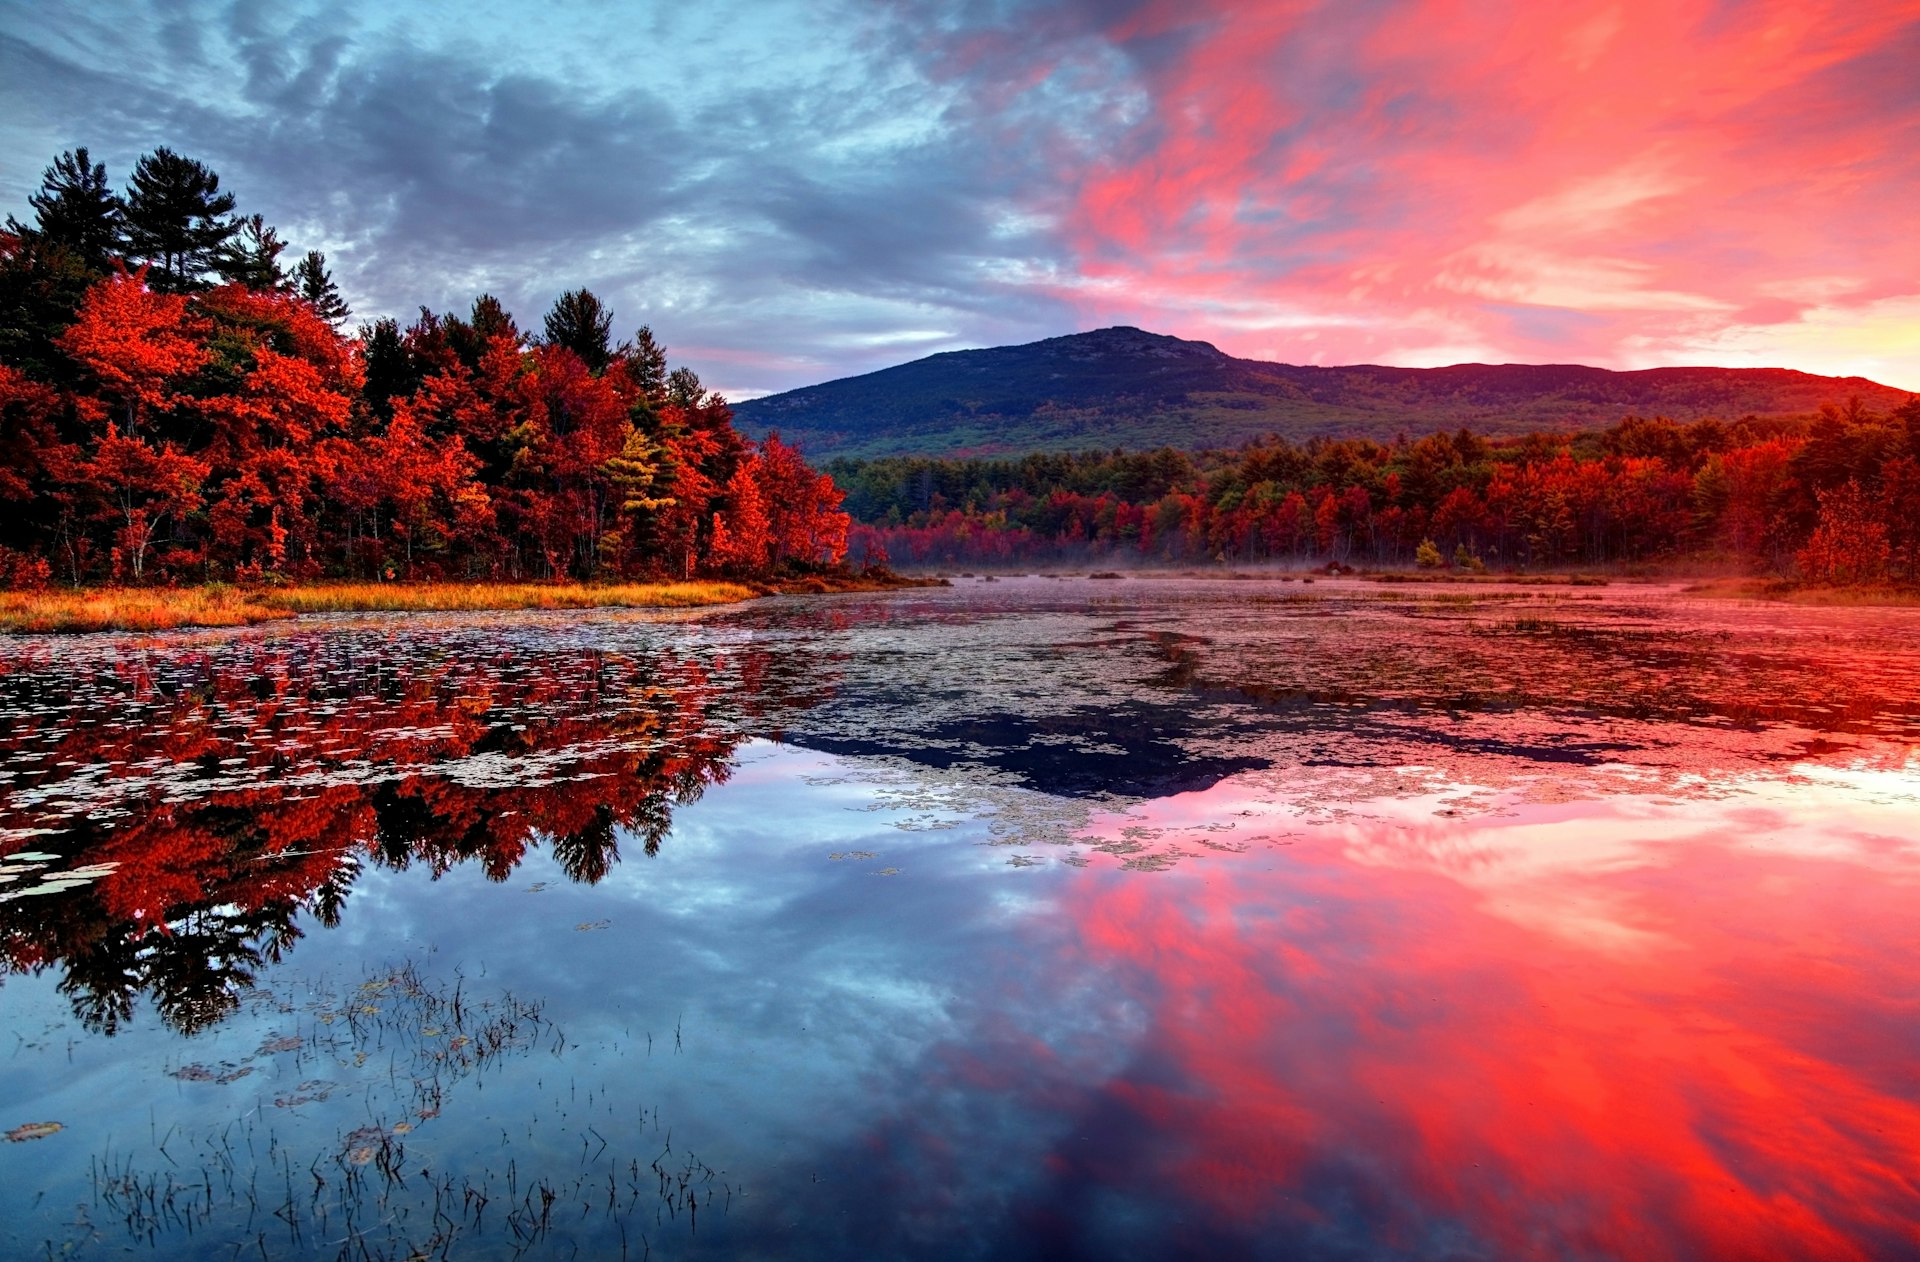 Brillaint sunset and Mount Monadnock reflecting on a small pond